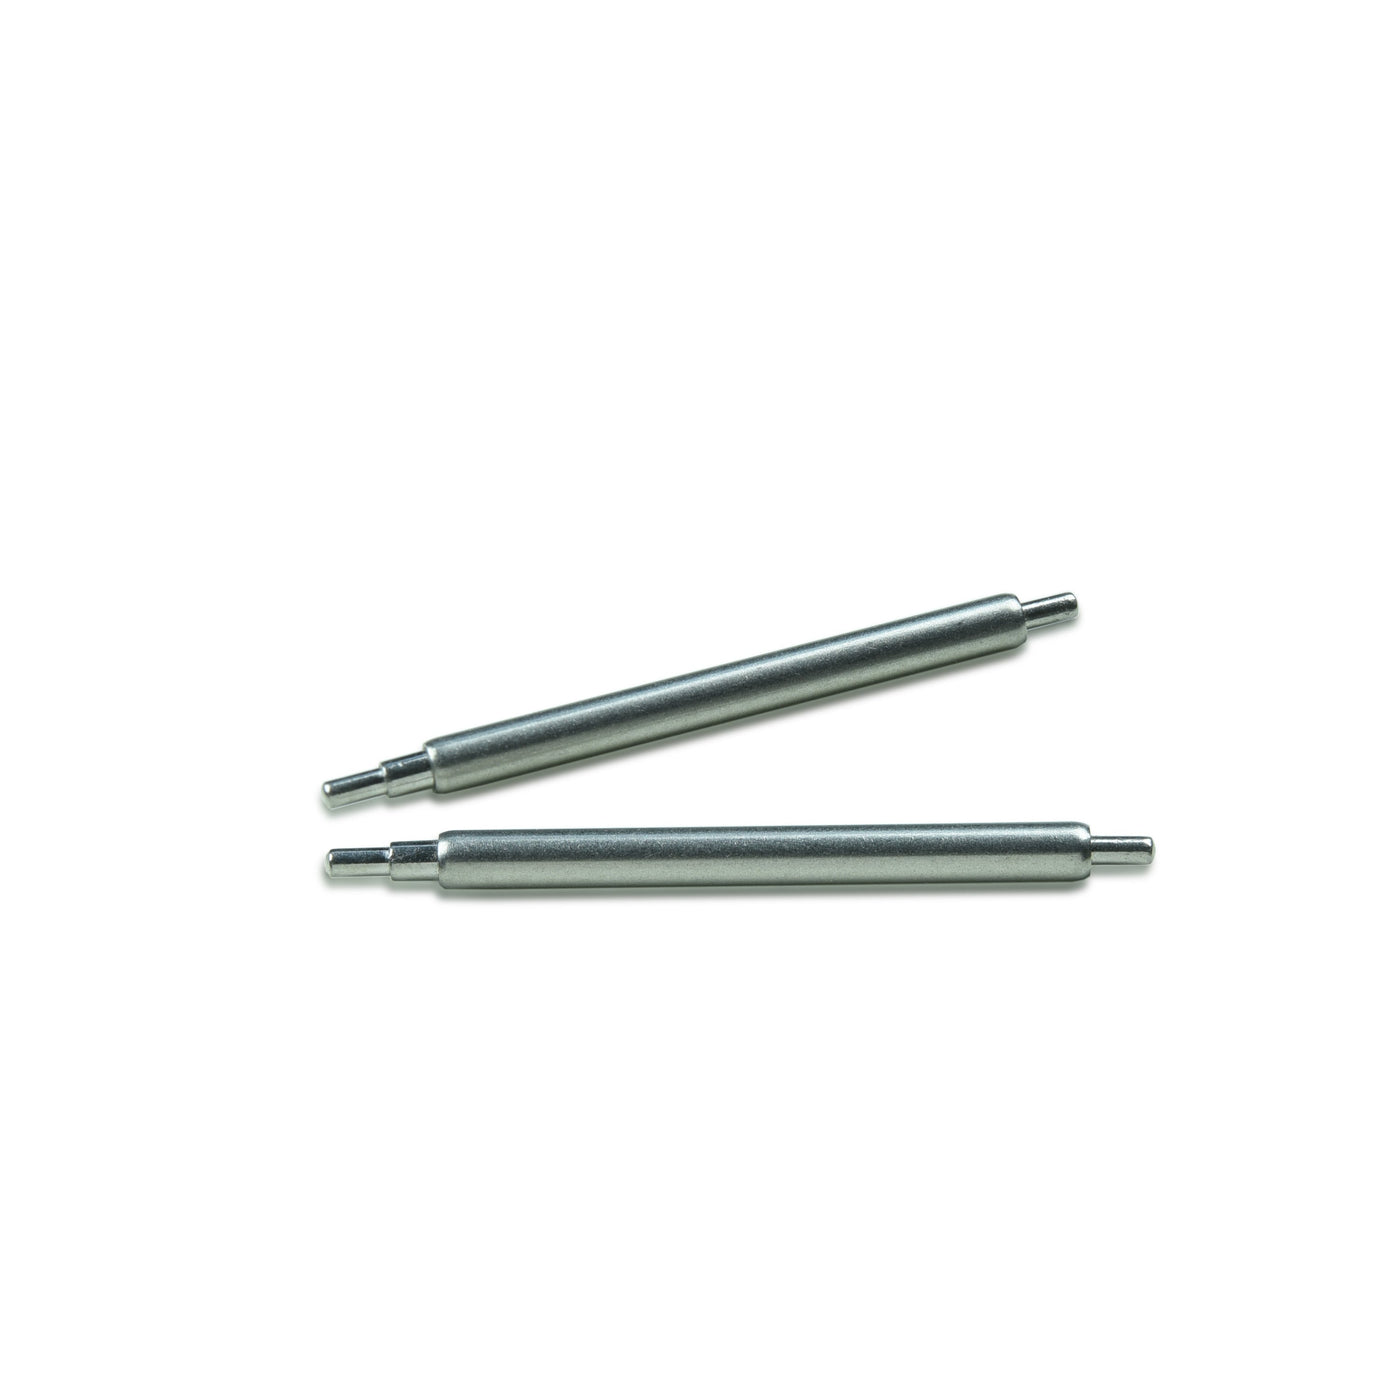 Rolex Datejust Lug Hole Style Rolex Replacement Spring Bars 1.8 mm by 20.0 mm